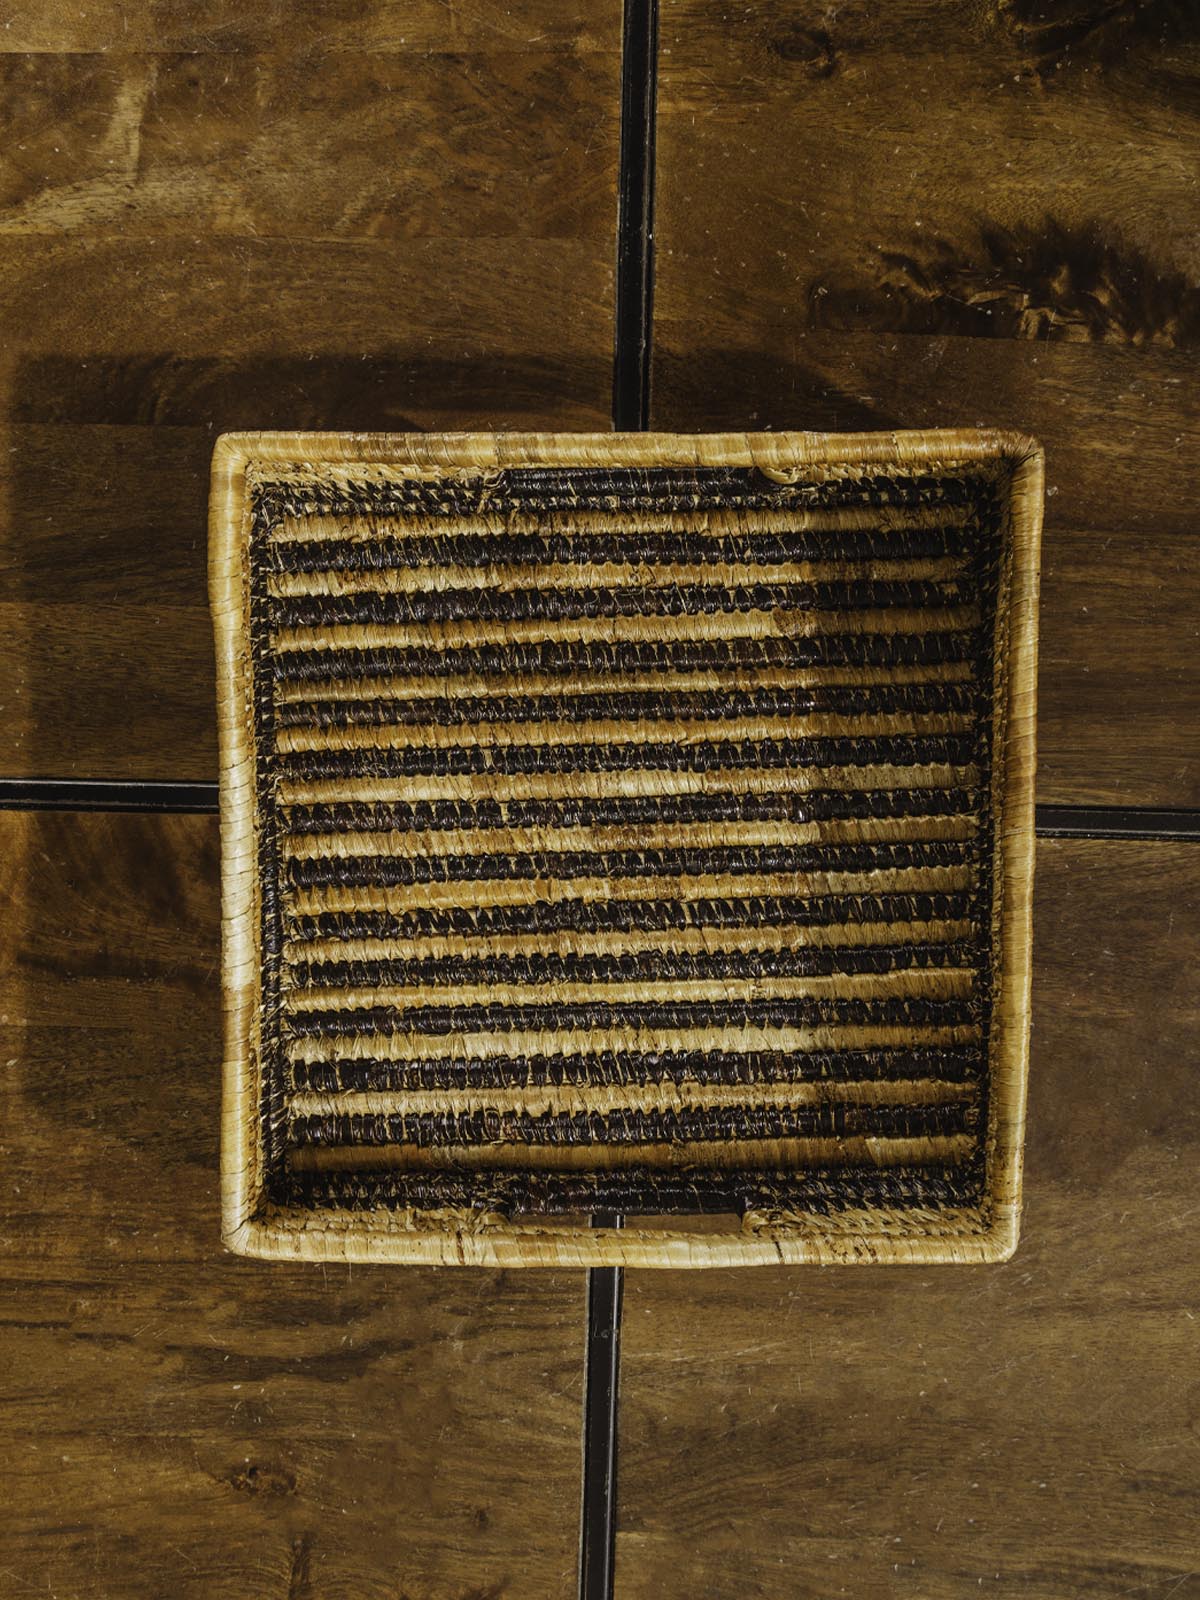 Brown woven basket in a square shape